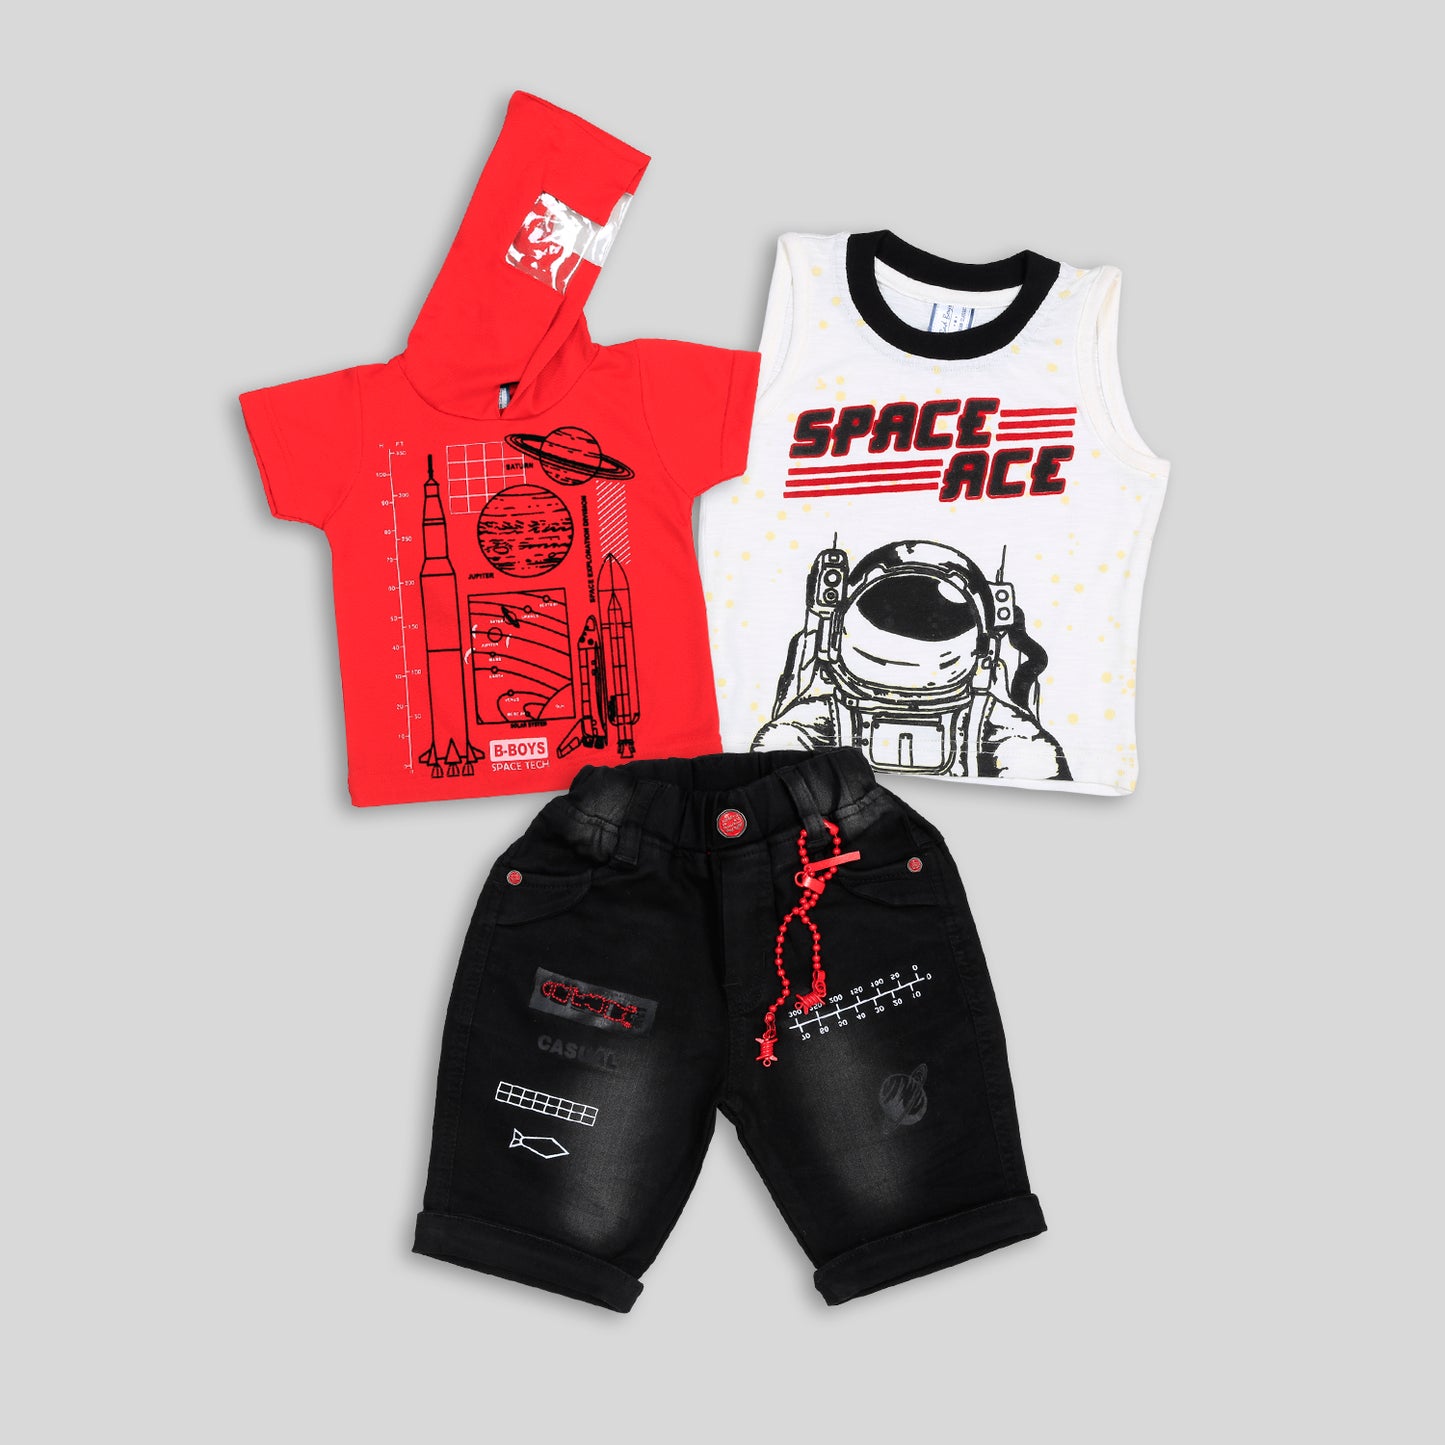 Bad Boys Stylish Outfit with Cotton T-shirt, Shorts and Hoodie